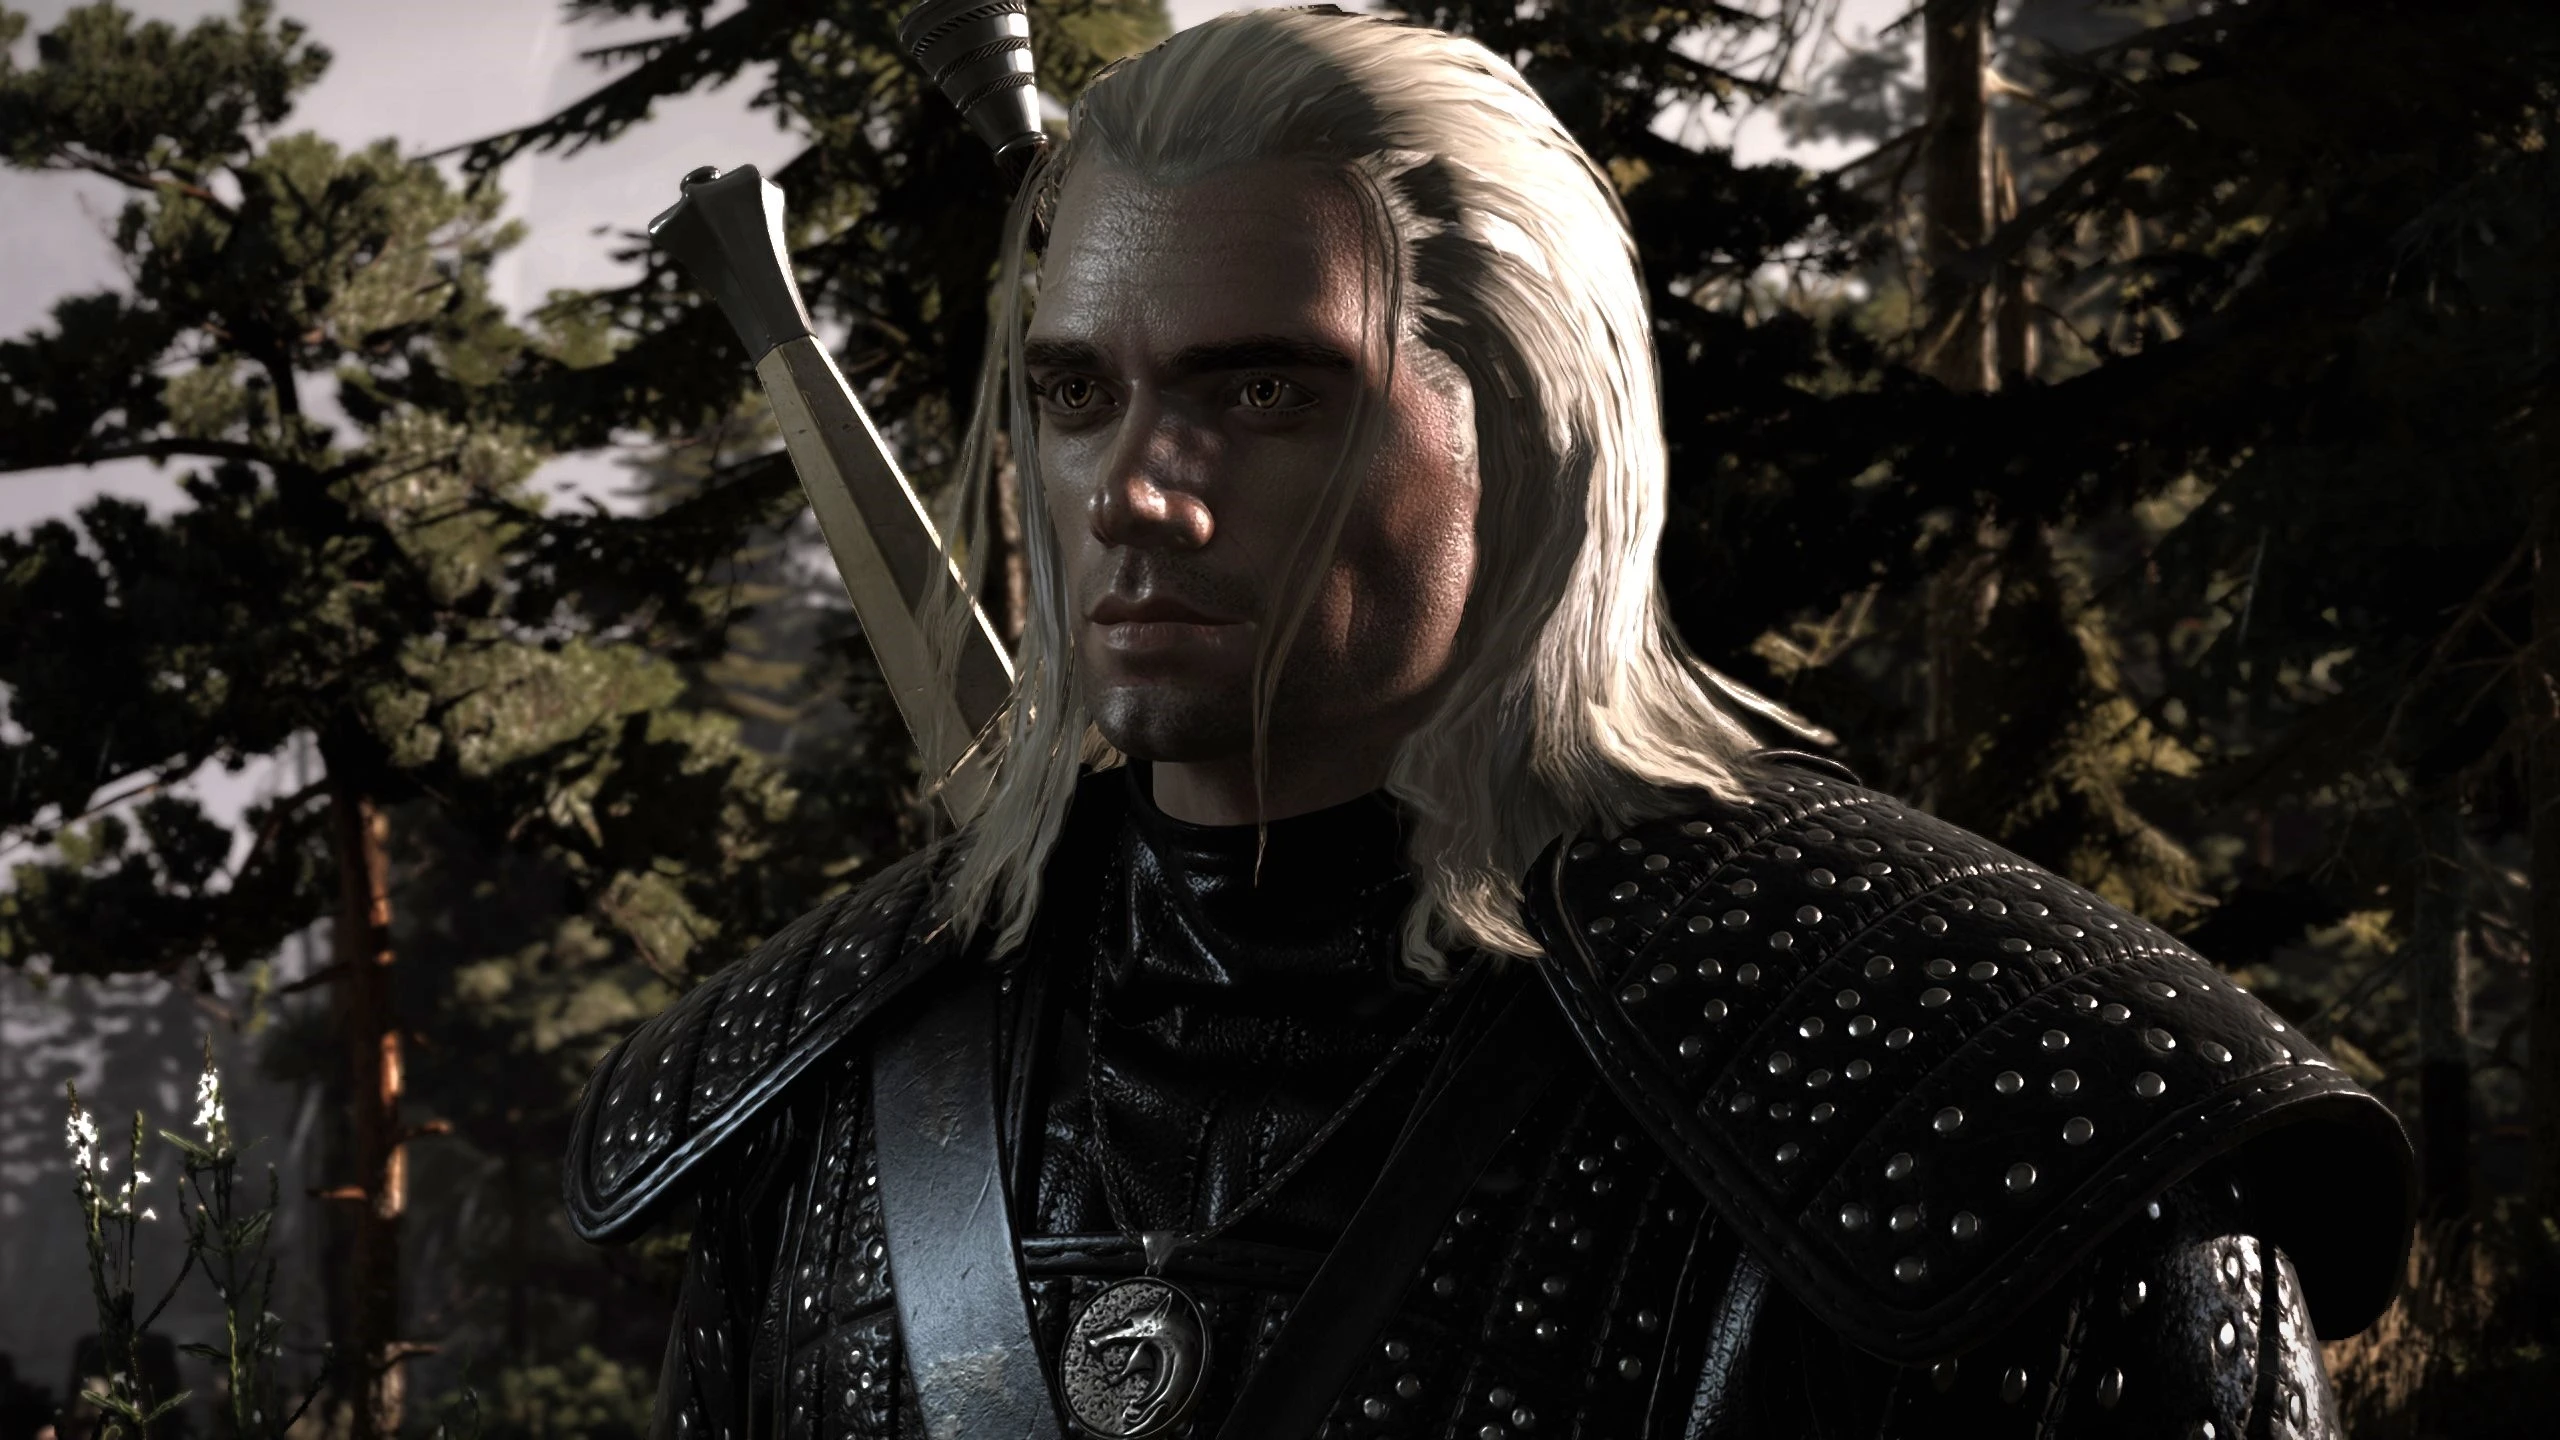 Best Henry Cavill face Mod by WitcherSeb at The Witcher 3 Nexus - Mods ...